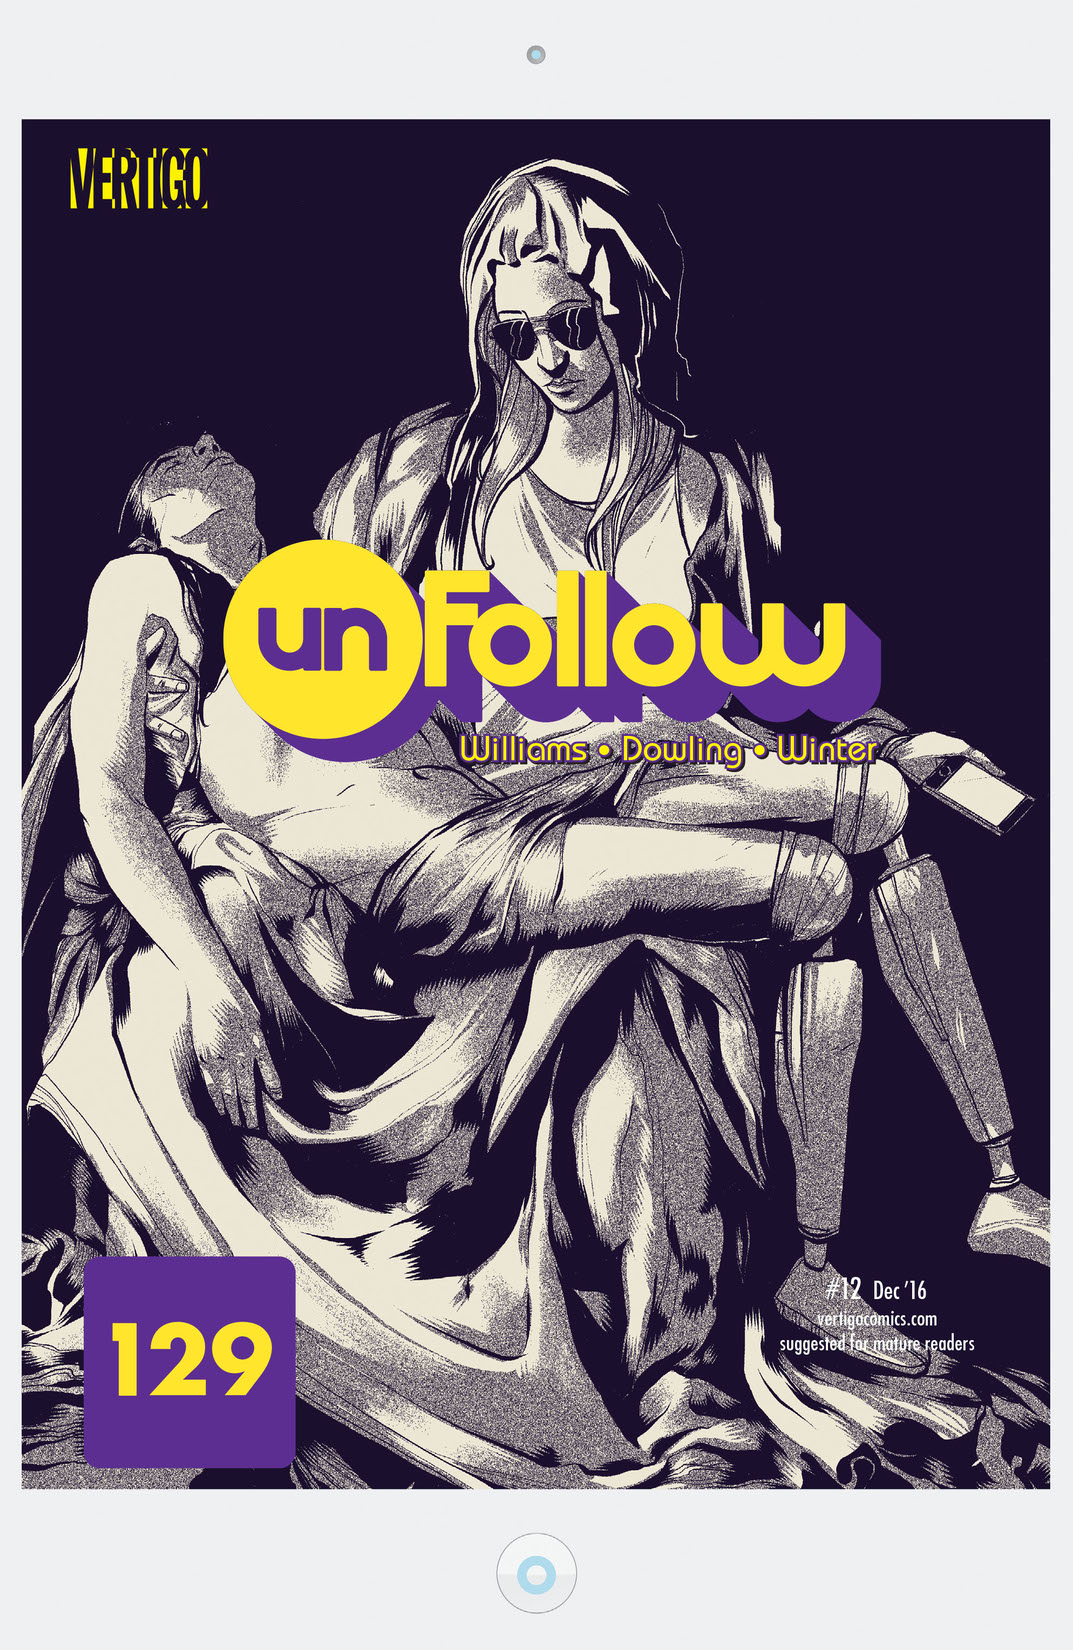 Unfollow #12 preview images